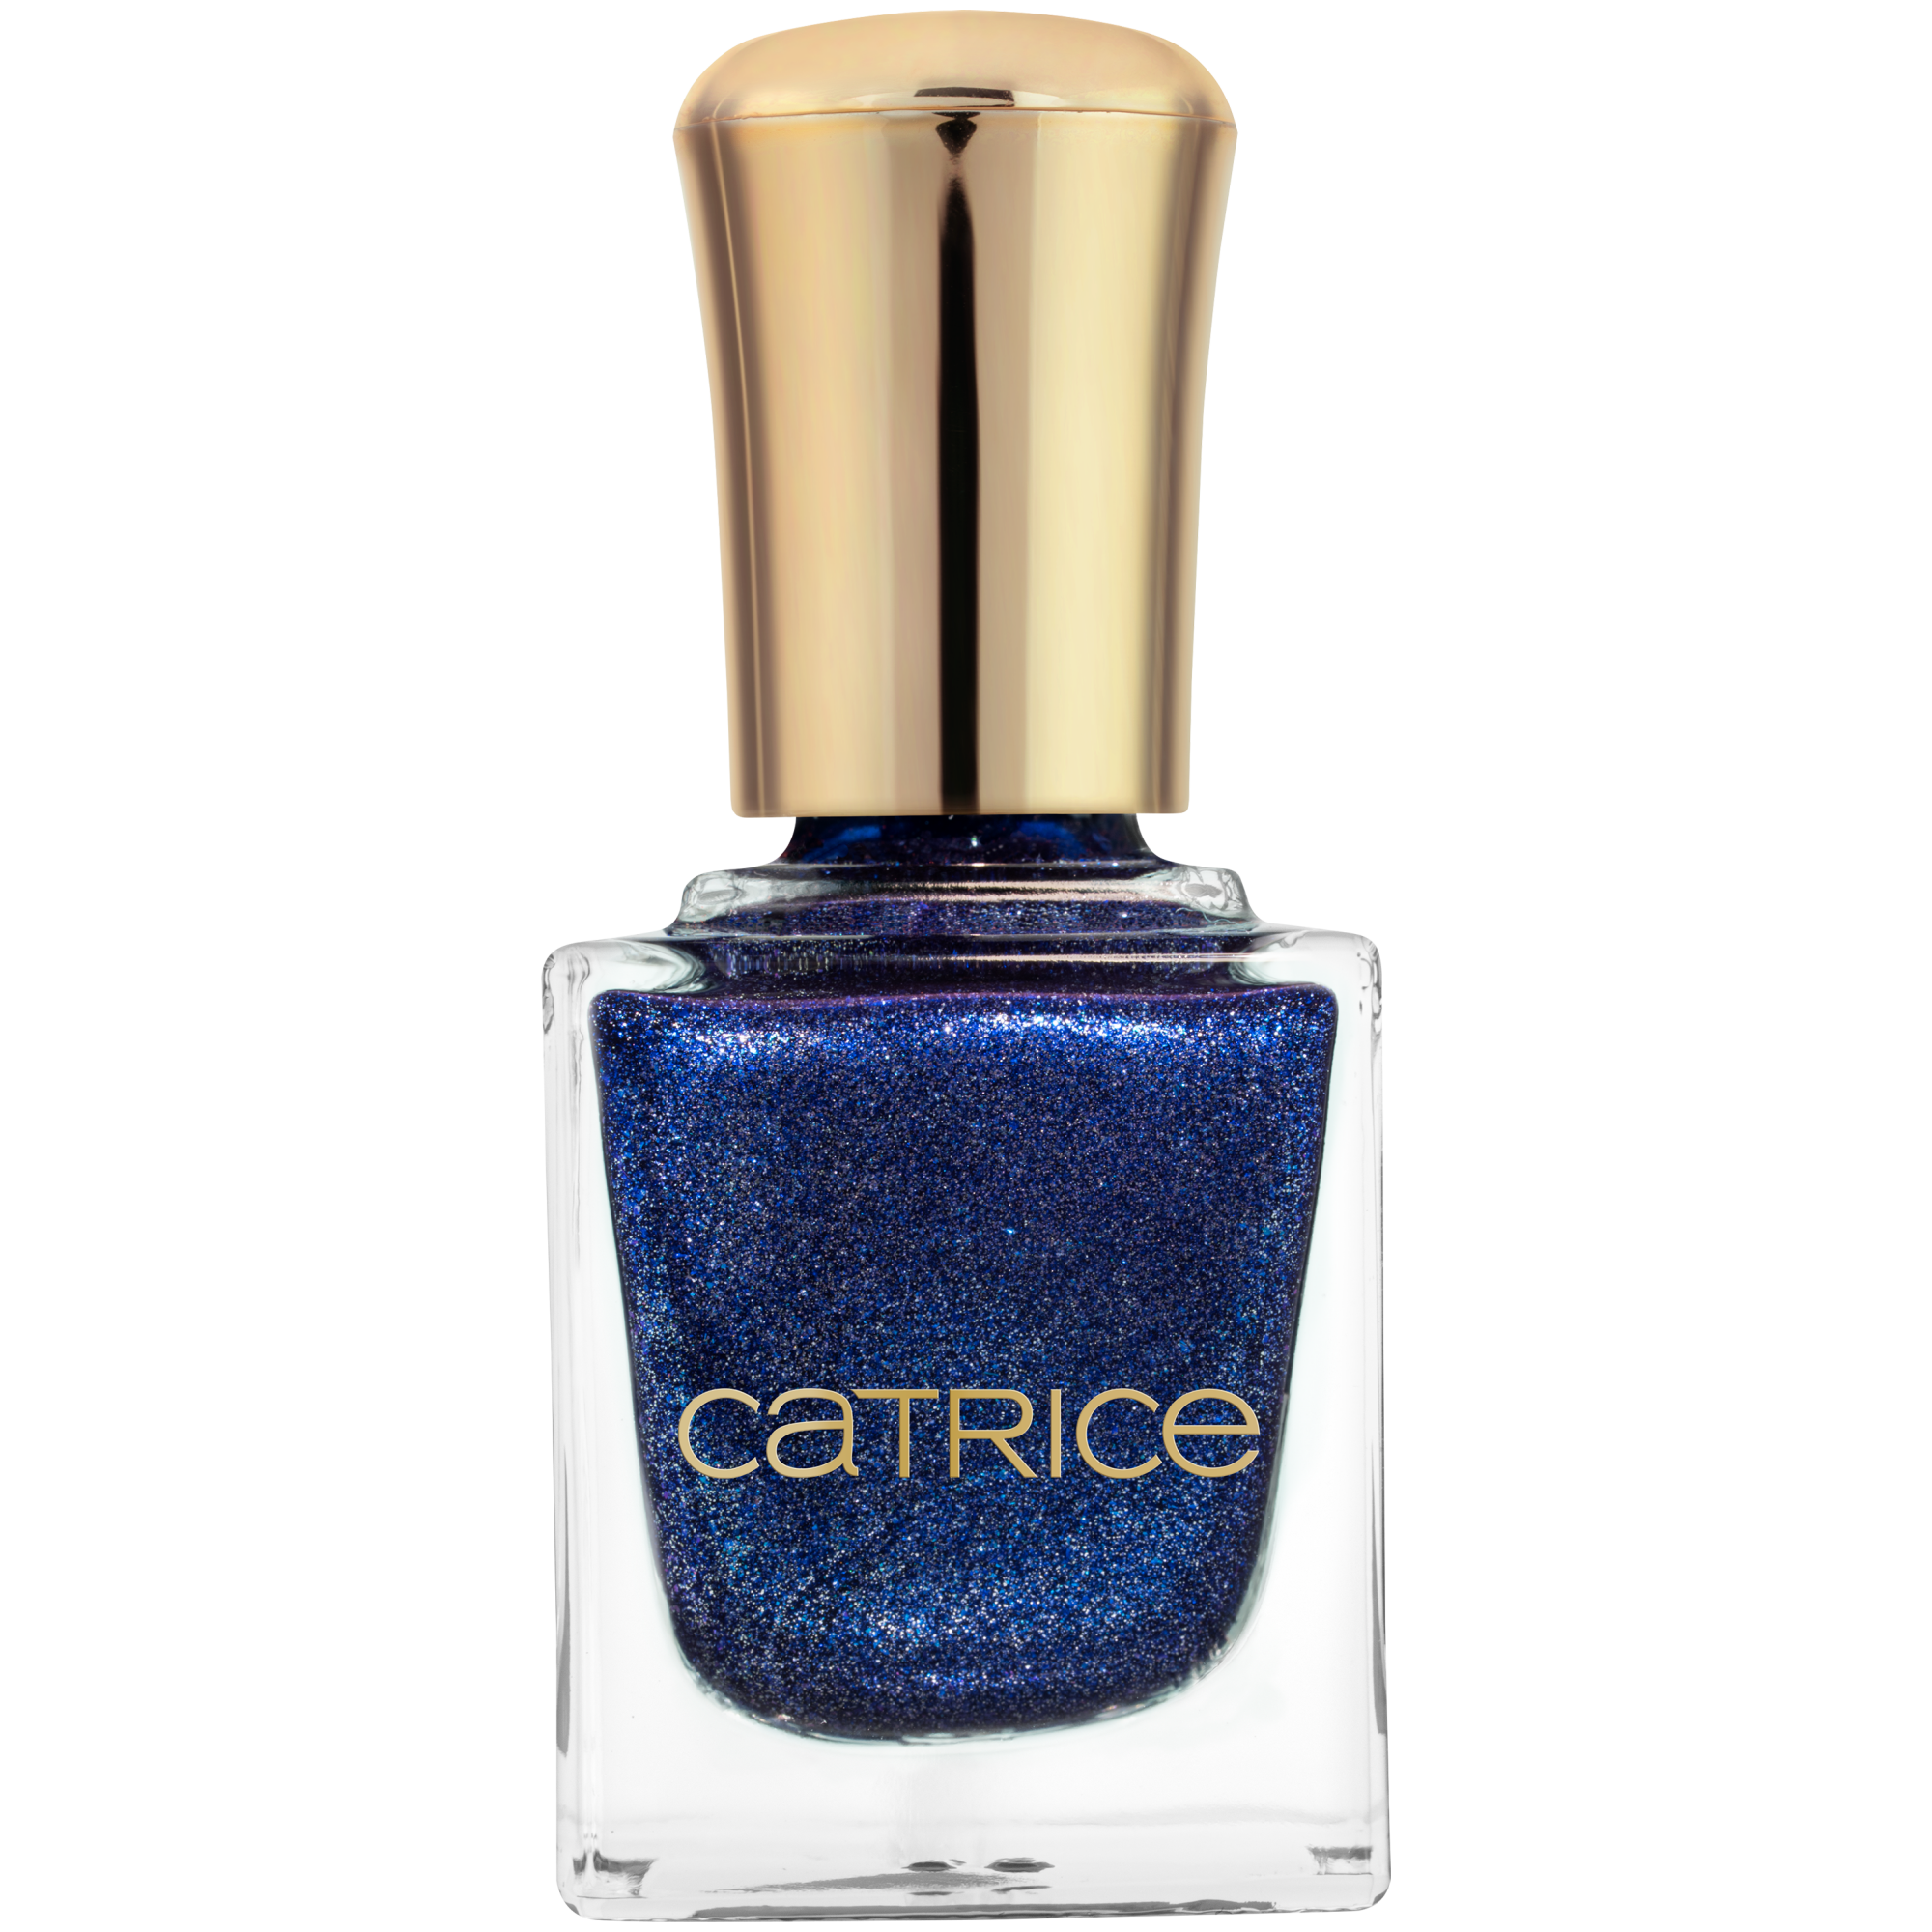 Catrice MAGIC CHRISTMAS STORY Nail Lacquer